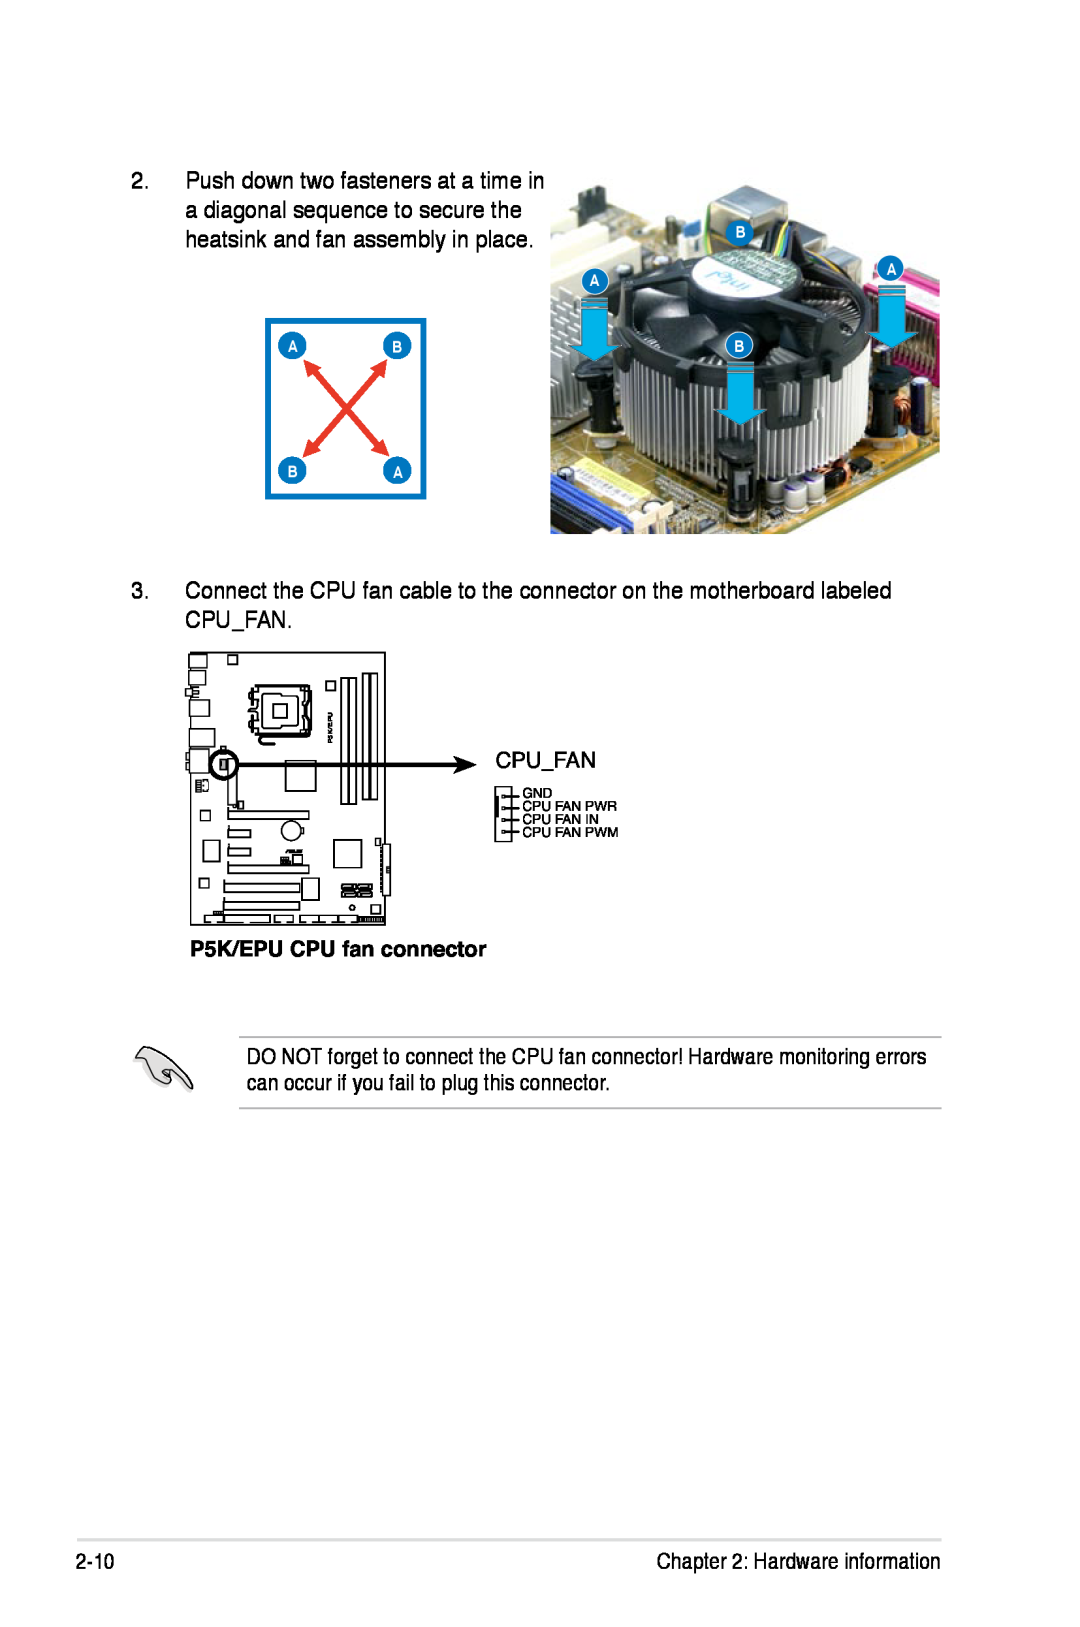 Asus manual heatsink and fan assembly in place, P5K/EPU CPU fan connector 